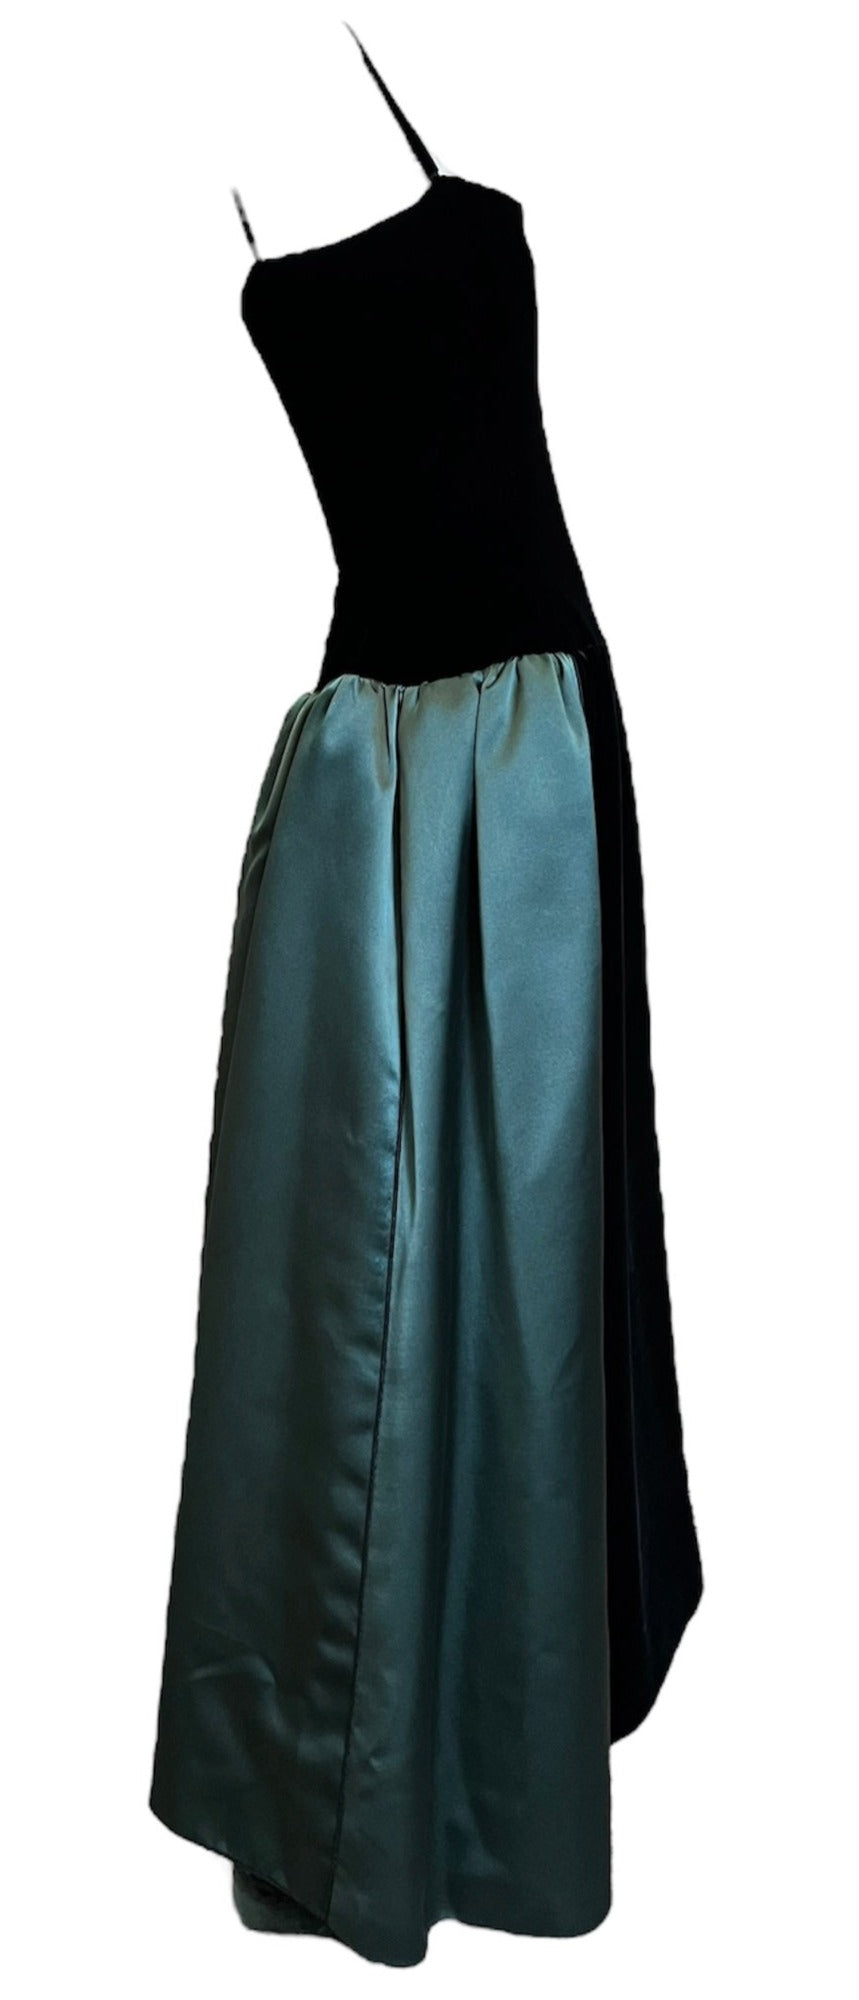 Yves Saint Laurent Couture 80s Black Velvet and Green Satin Gown SIDE 2 of 4